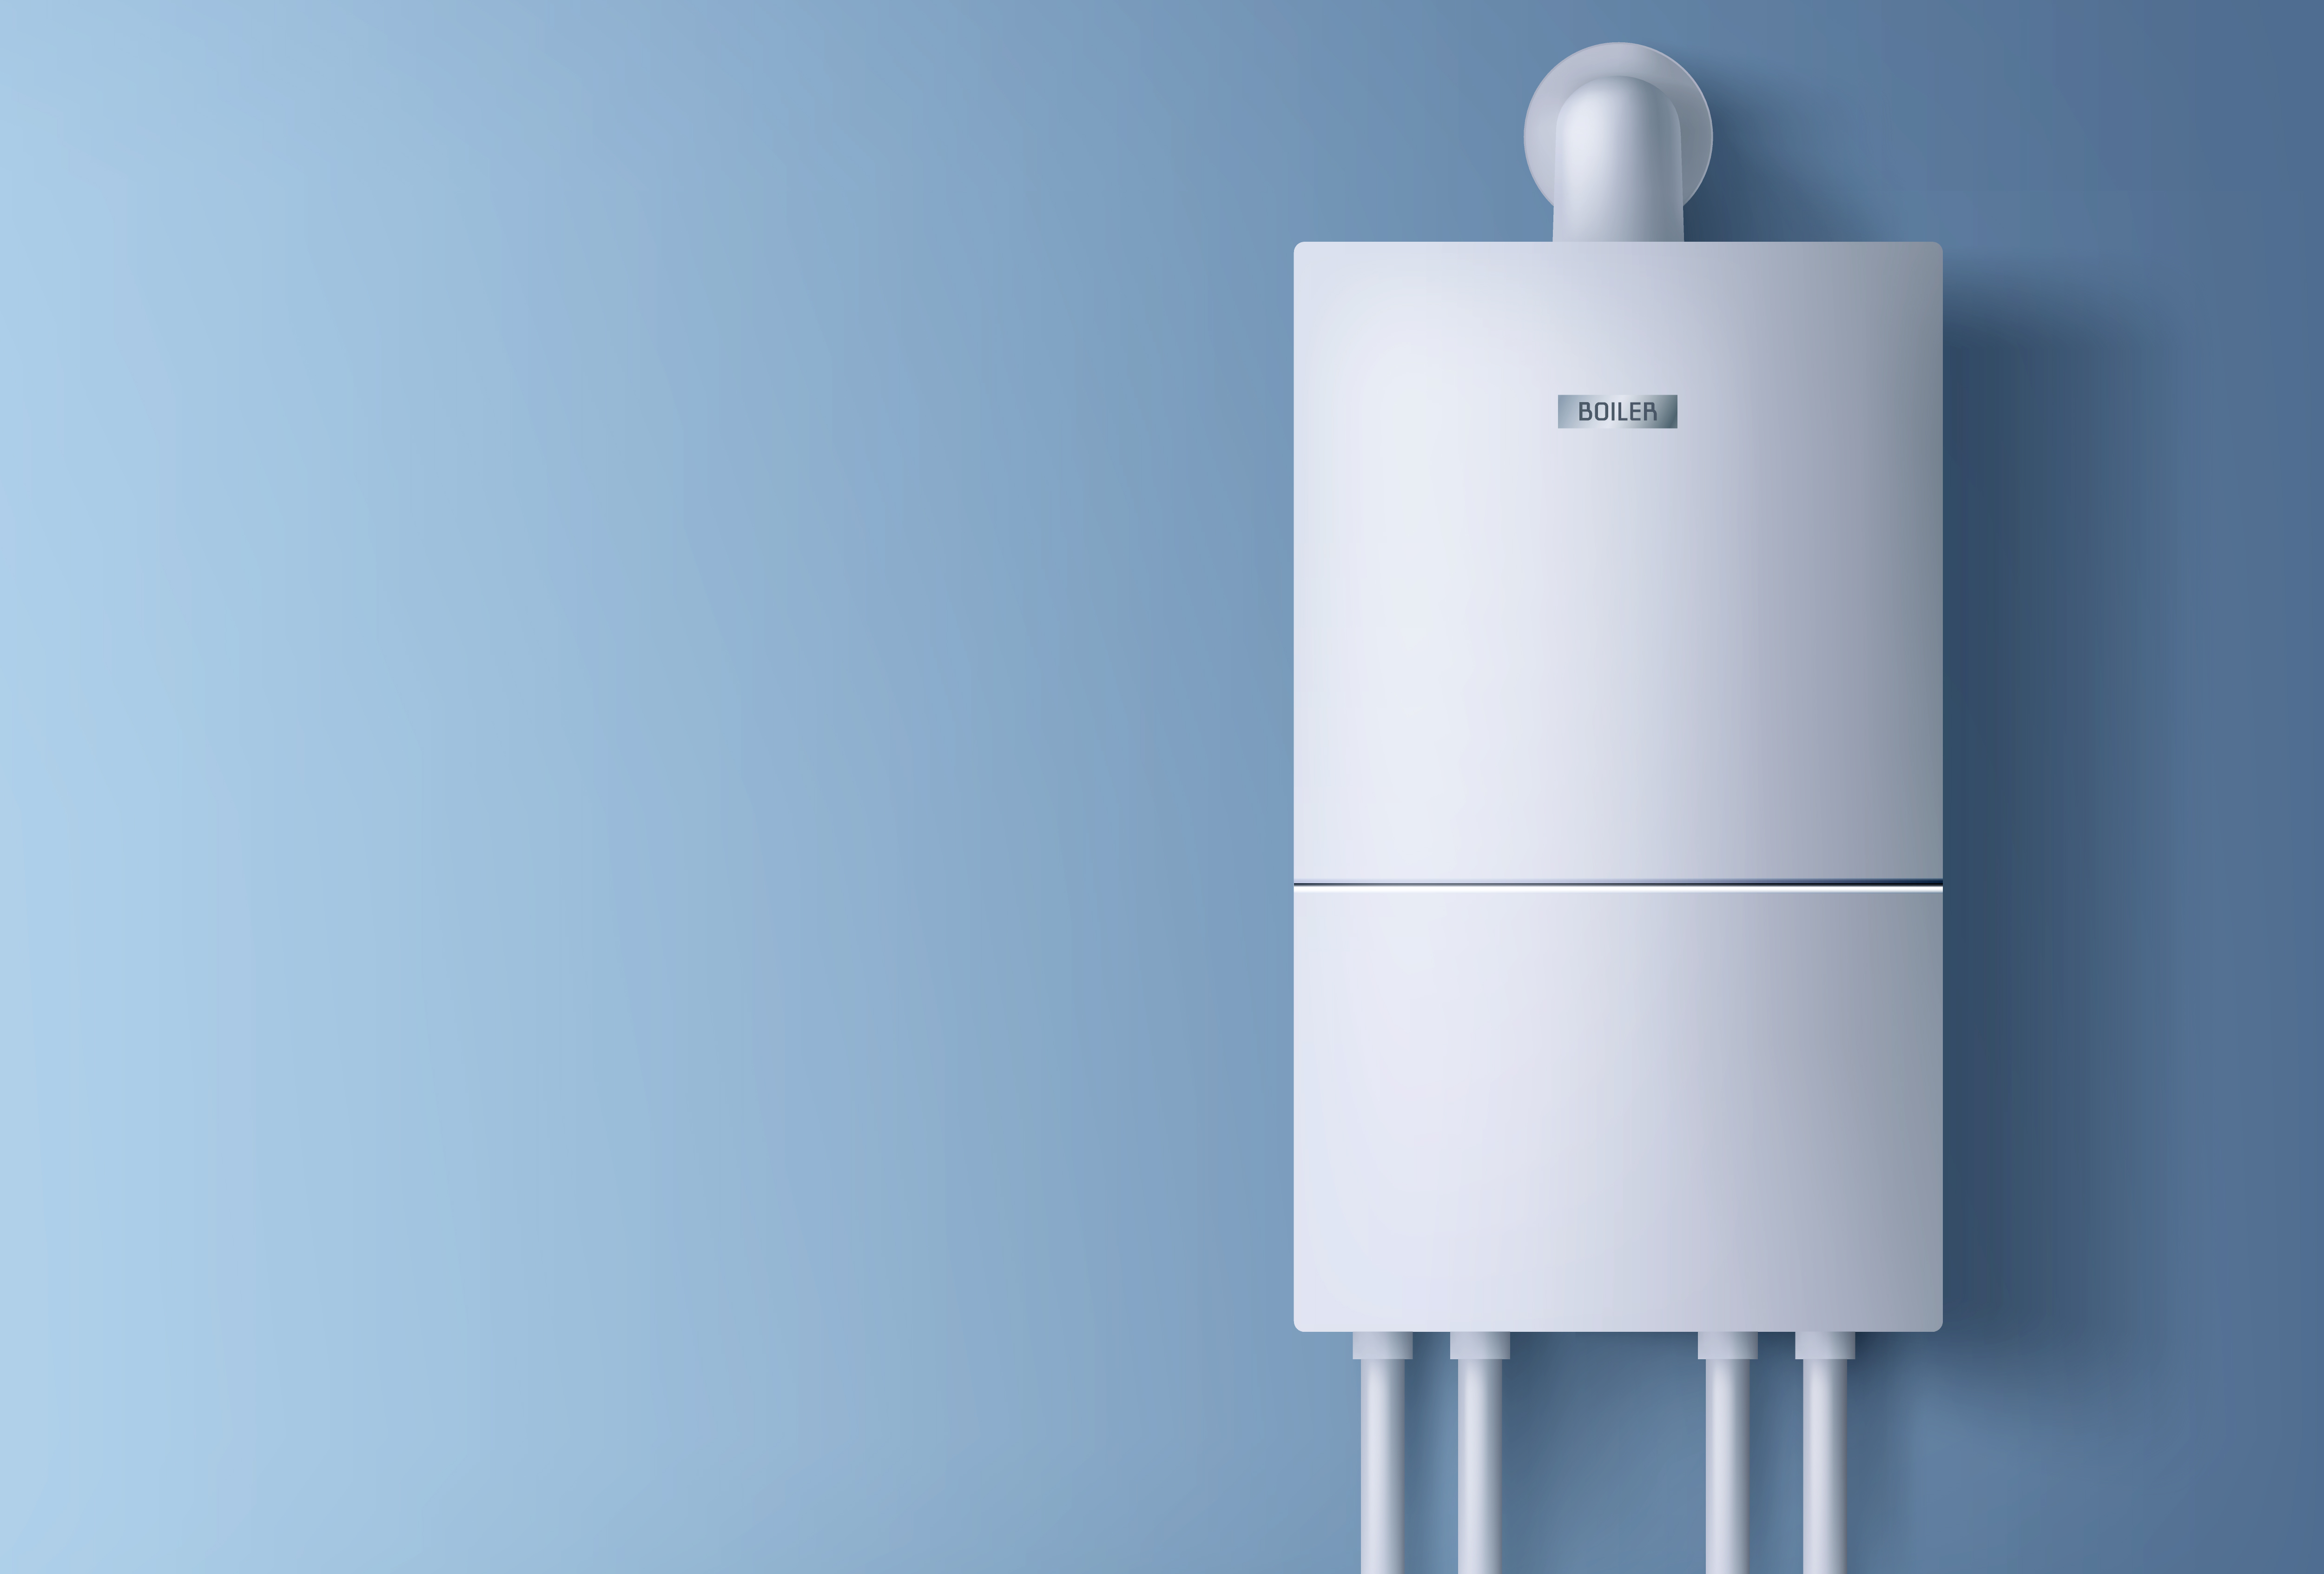 Xpress Boiler Provides Sustainable Options For Gas Boiler Replacement In Glasgow In Light Of Scottish Government's Phased Approach